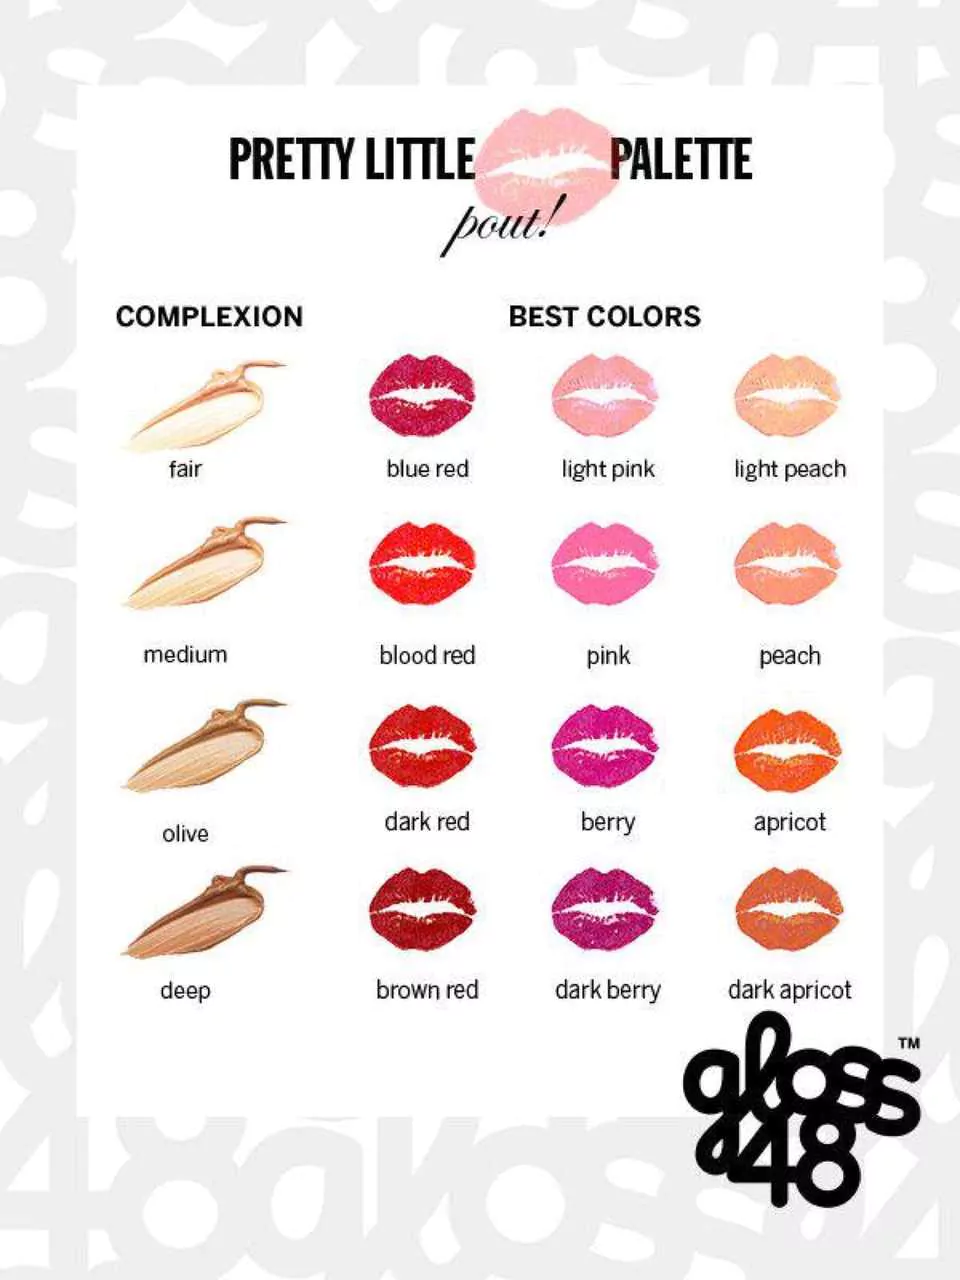 How To Find The Perfect Lipstick Colors For Your Skin Tone